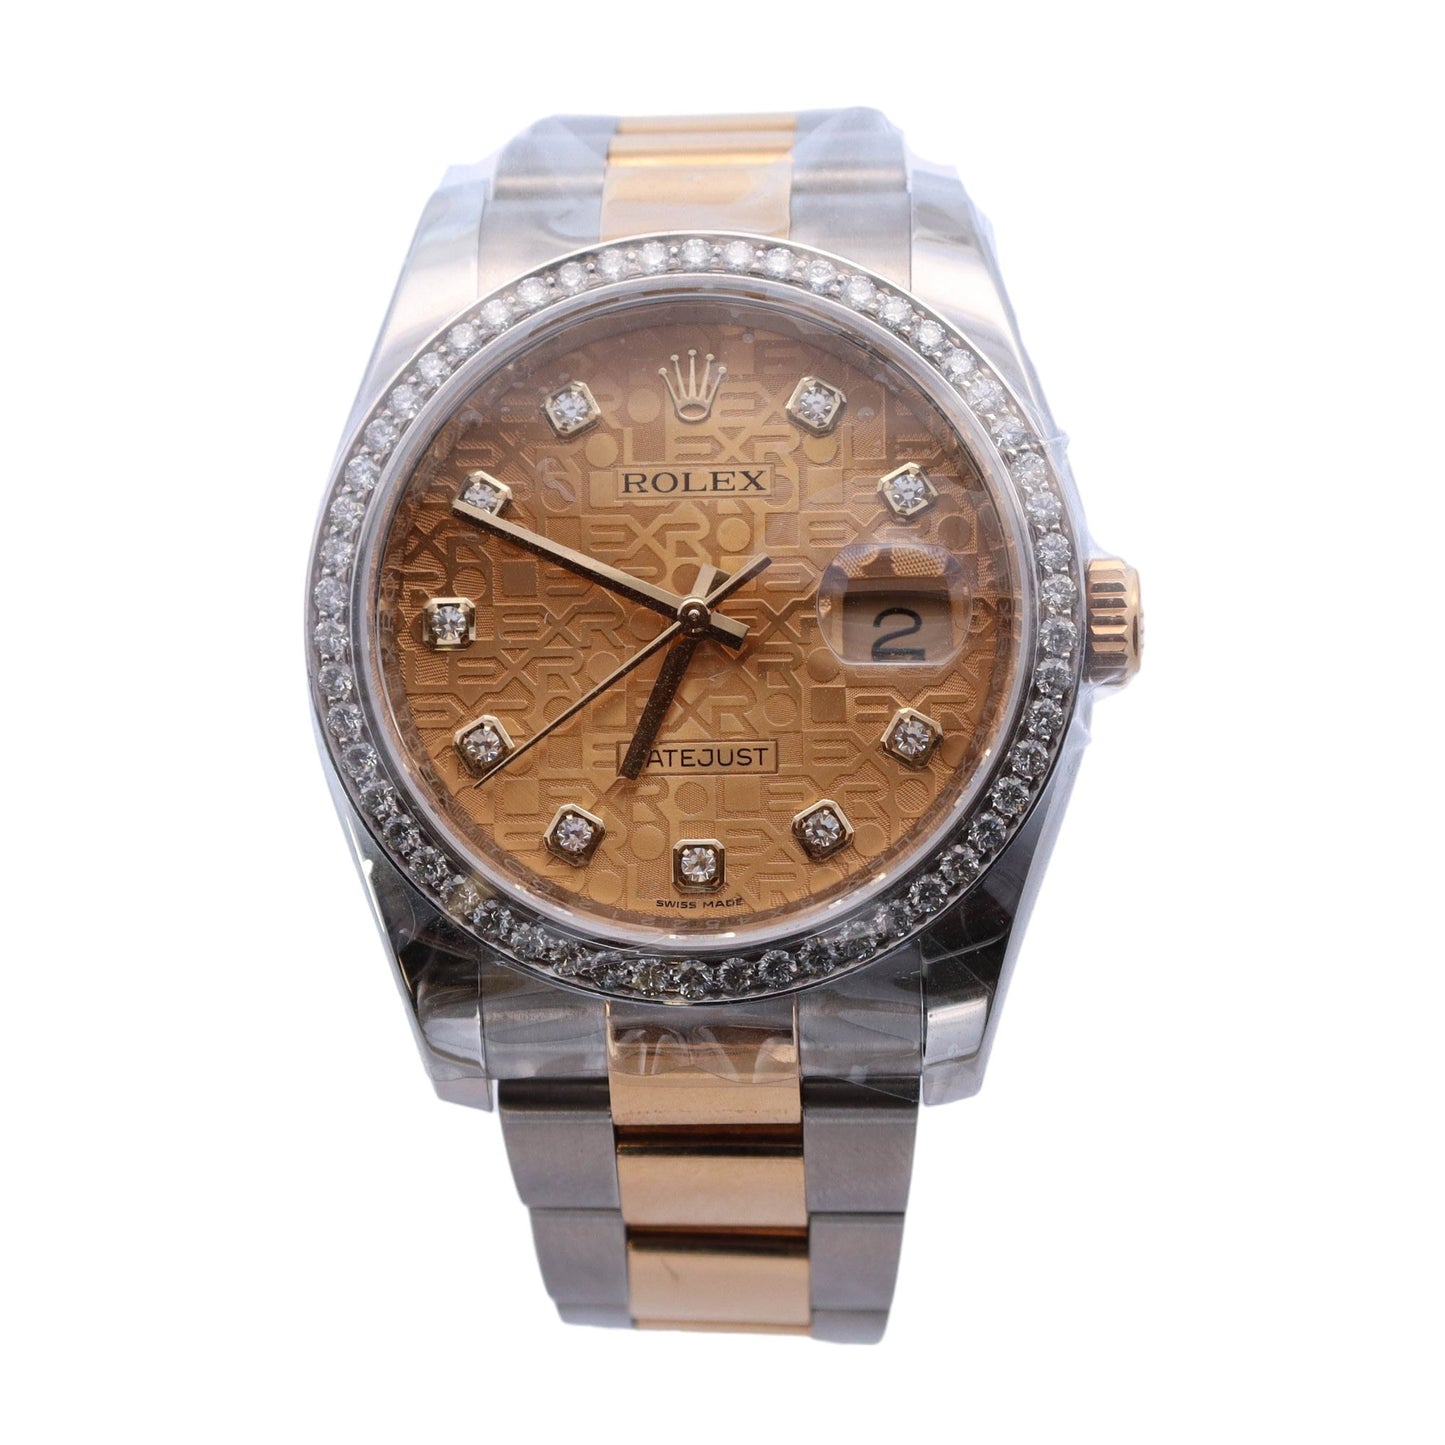 Rolex Datejust 36mm Yellow Gold & Stainless Steel 36mm Champagne Jubilee Diamond Dial Watch Reference # : 116233 - Happy Jewelers Fine Jewelry Lifetime Warranty